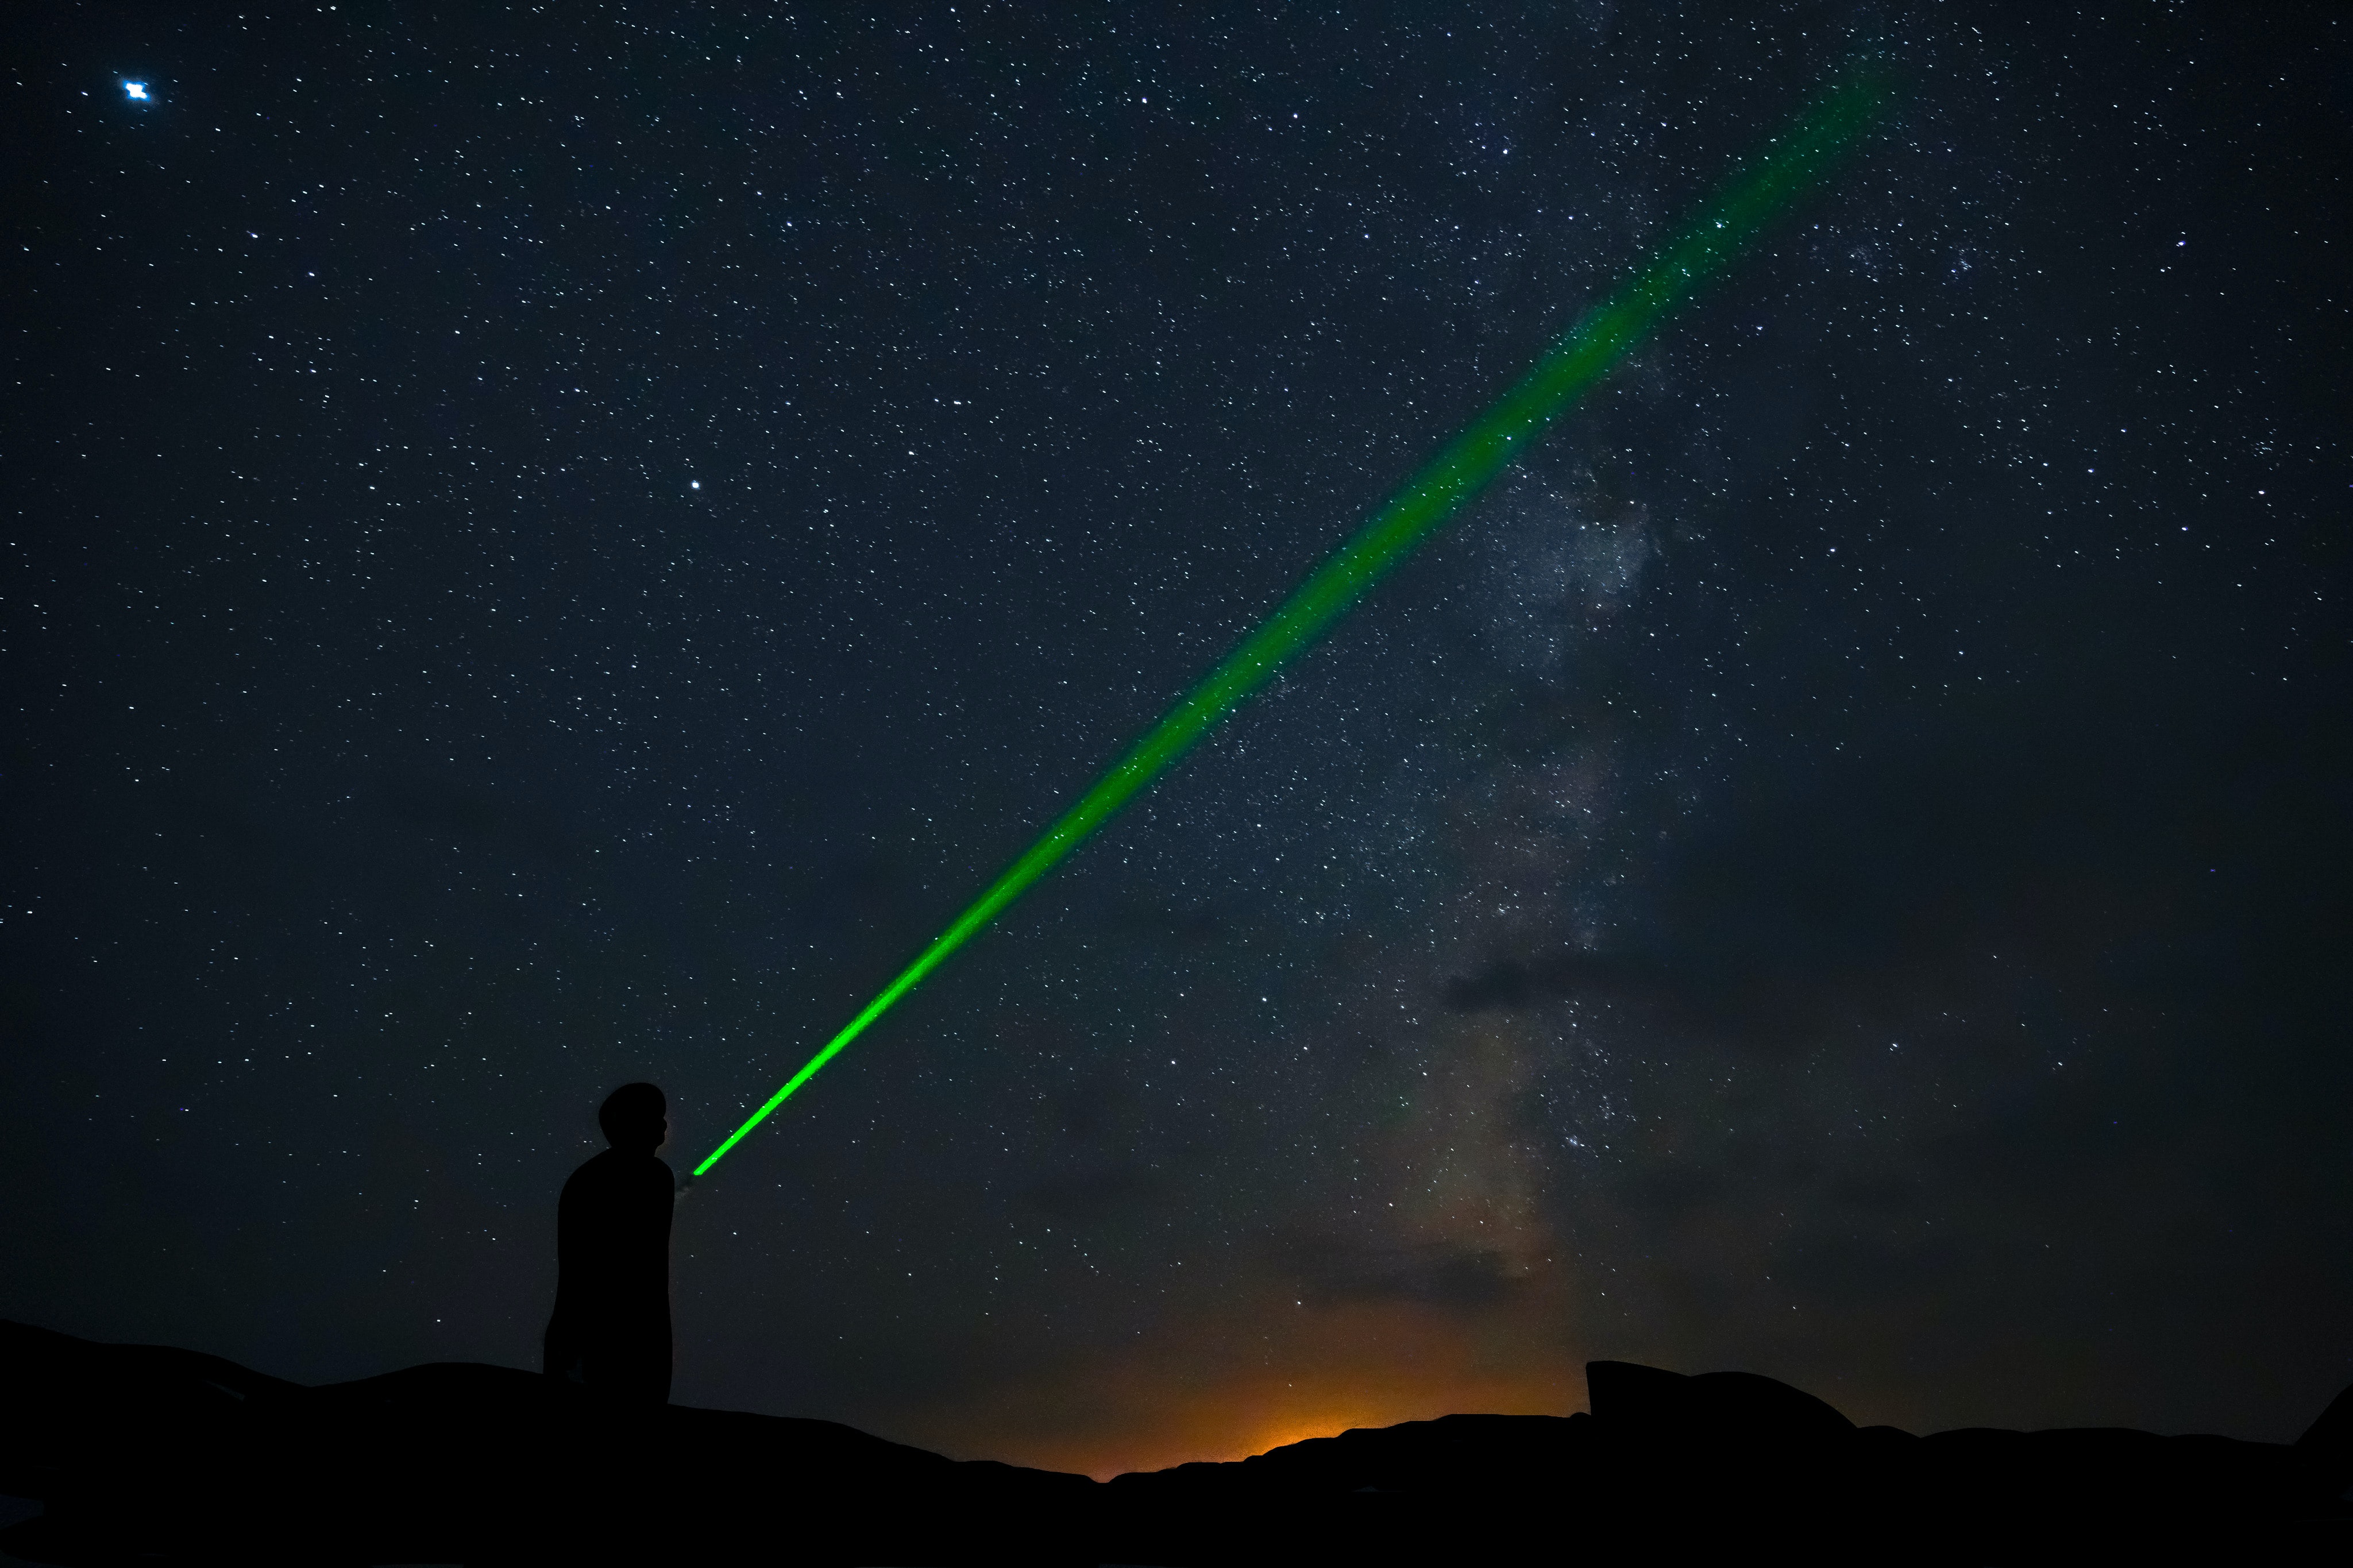 A man pointing a green laser at the night sky